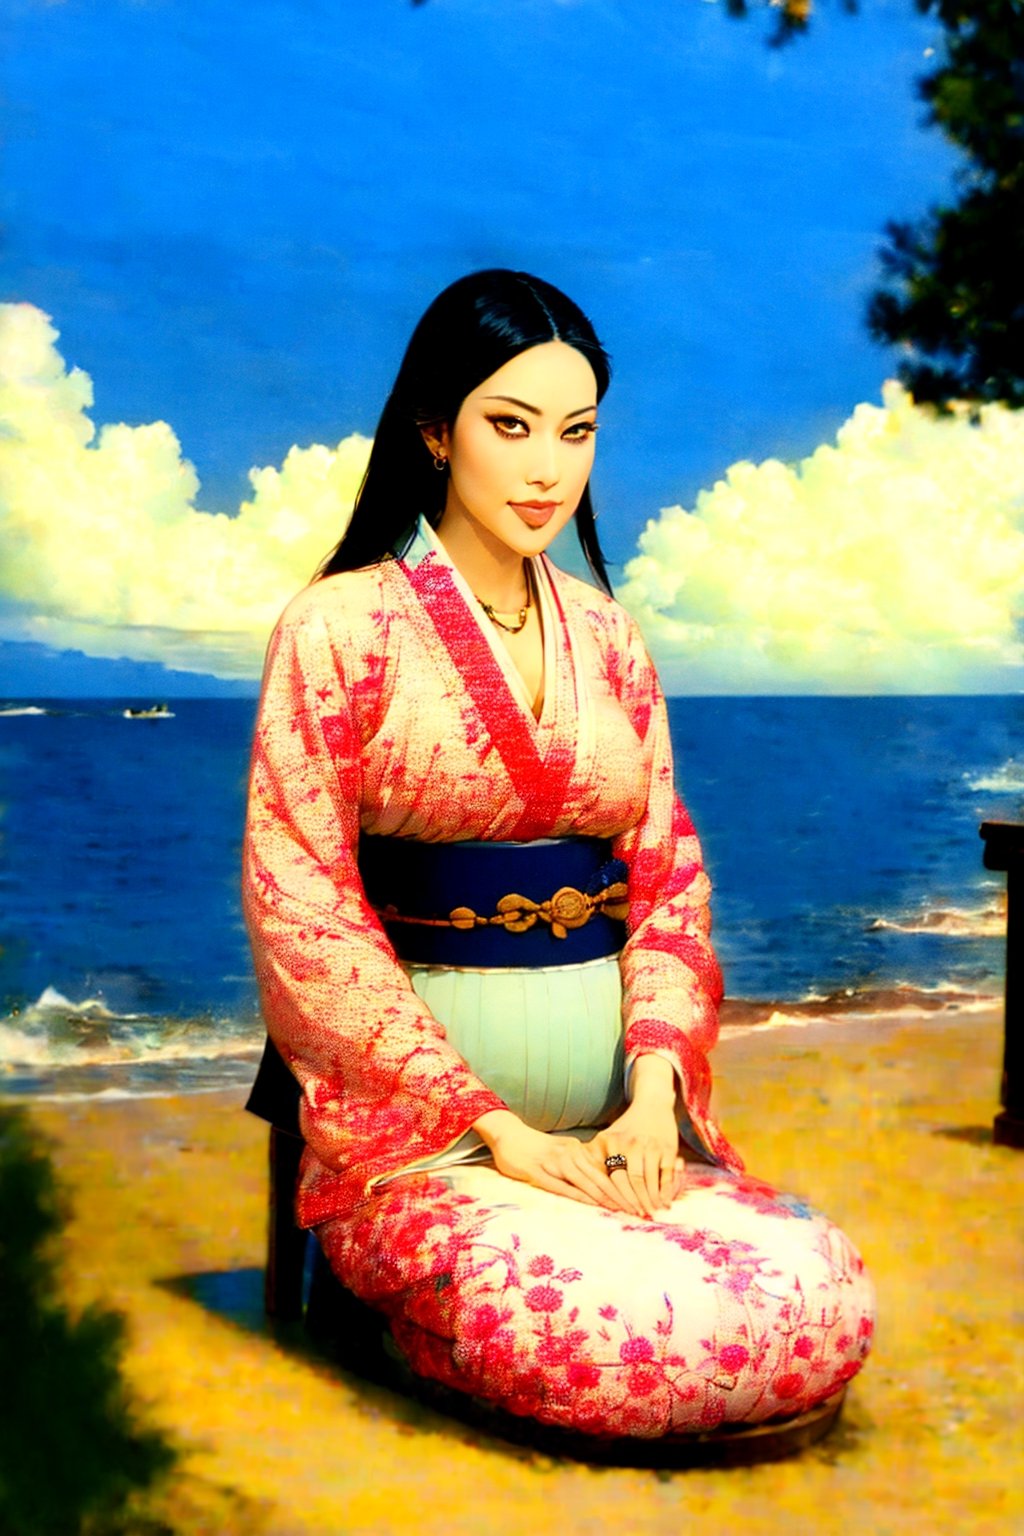 woman\(unohana retsu, mature body, perfect body, black hair, blue eye color, jewelery, bridal gauntlets, rings, amulets, eyelashes, large breasts, large cleavage, pregnant, wearing yukata, sandal, feminine, beautiful, mistress\) The scene should convey a seductive and arrogant smug expression on her face, with an air of arrogance as she maintains eye contact with the viewer, (full body), sitting, background(beach, restaurant, pillows, sky, day, sun, table(sake), pots with flowers),(masterpiece, highres, high quality:1.2), ambient occlusion, low saturation, High detailed, Detailedface